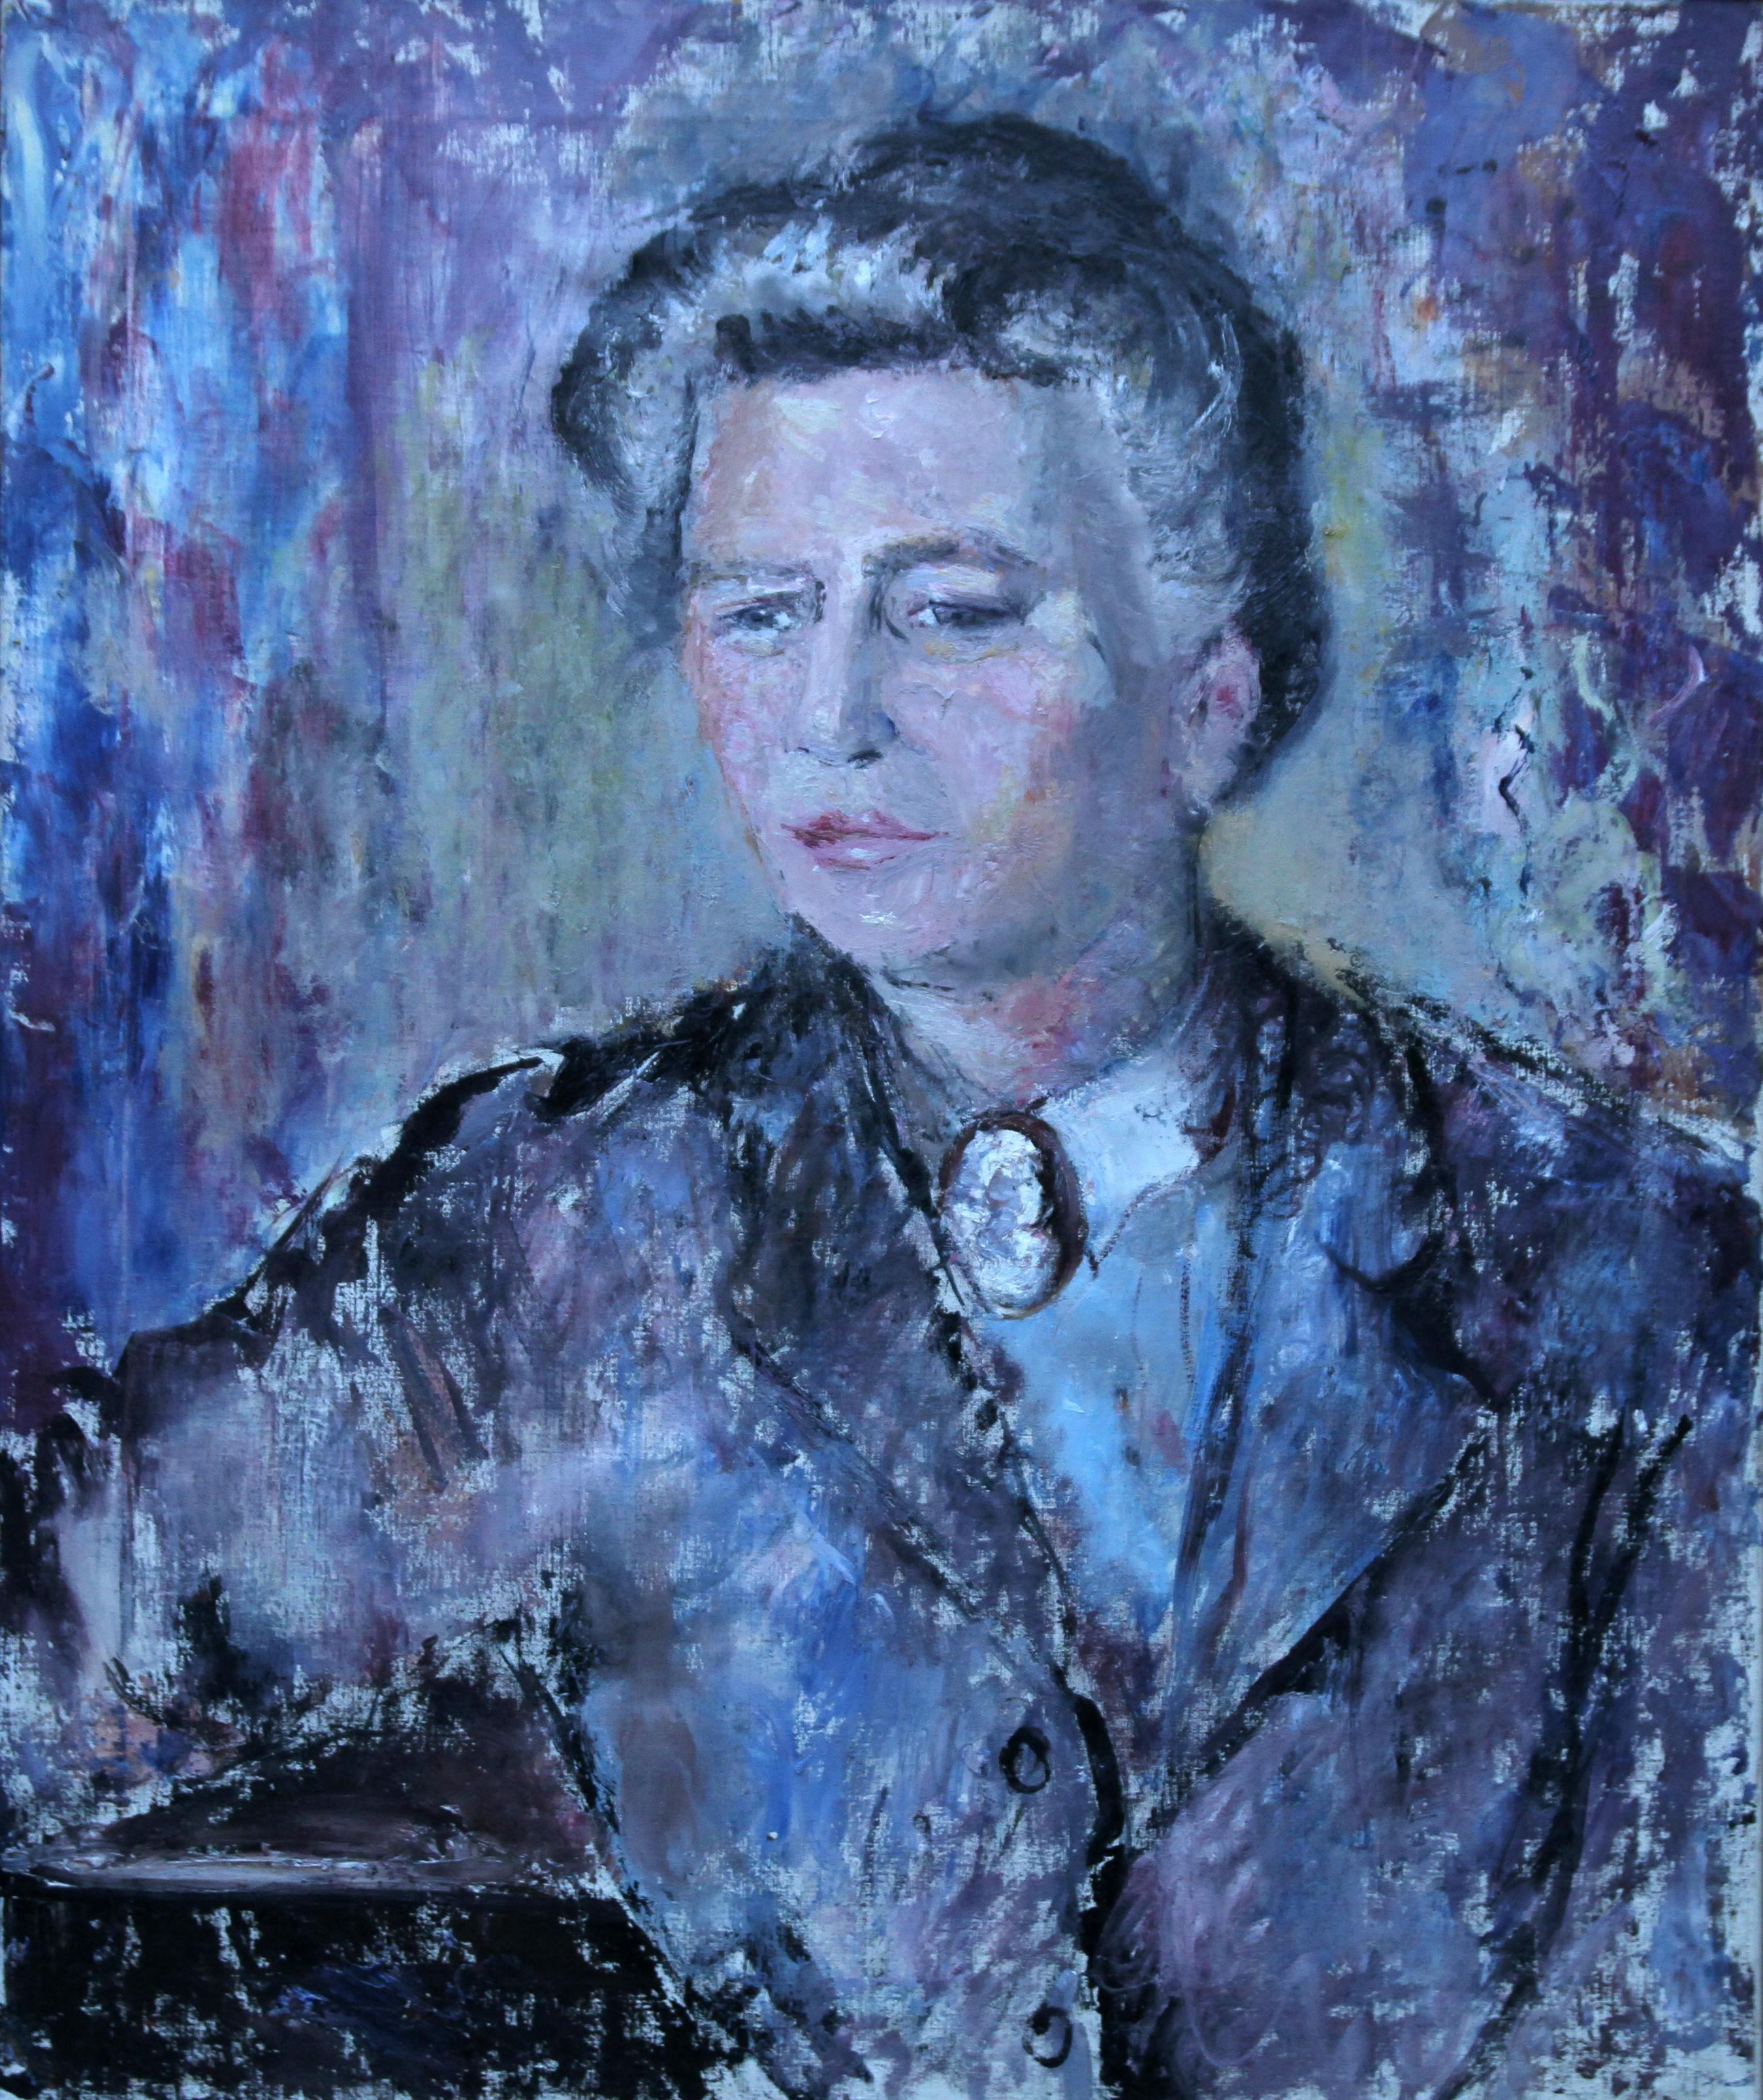 A vibrant portrait oil painting by female artist Pauline Glass who was educated on the continent at the Academy Julien and who exhibited throughout her career. This stunning oil is a bold, adventurous and confident portrait of a woman by a very